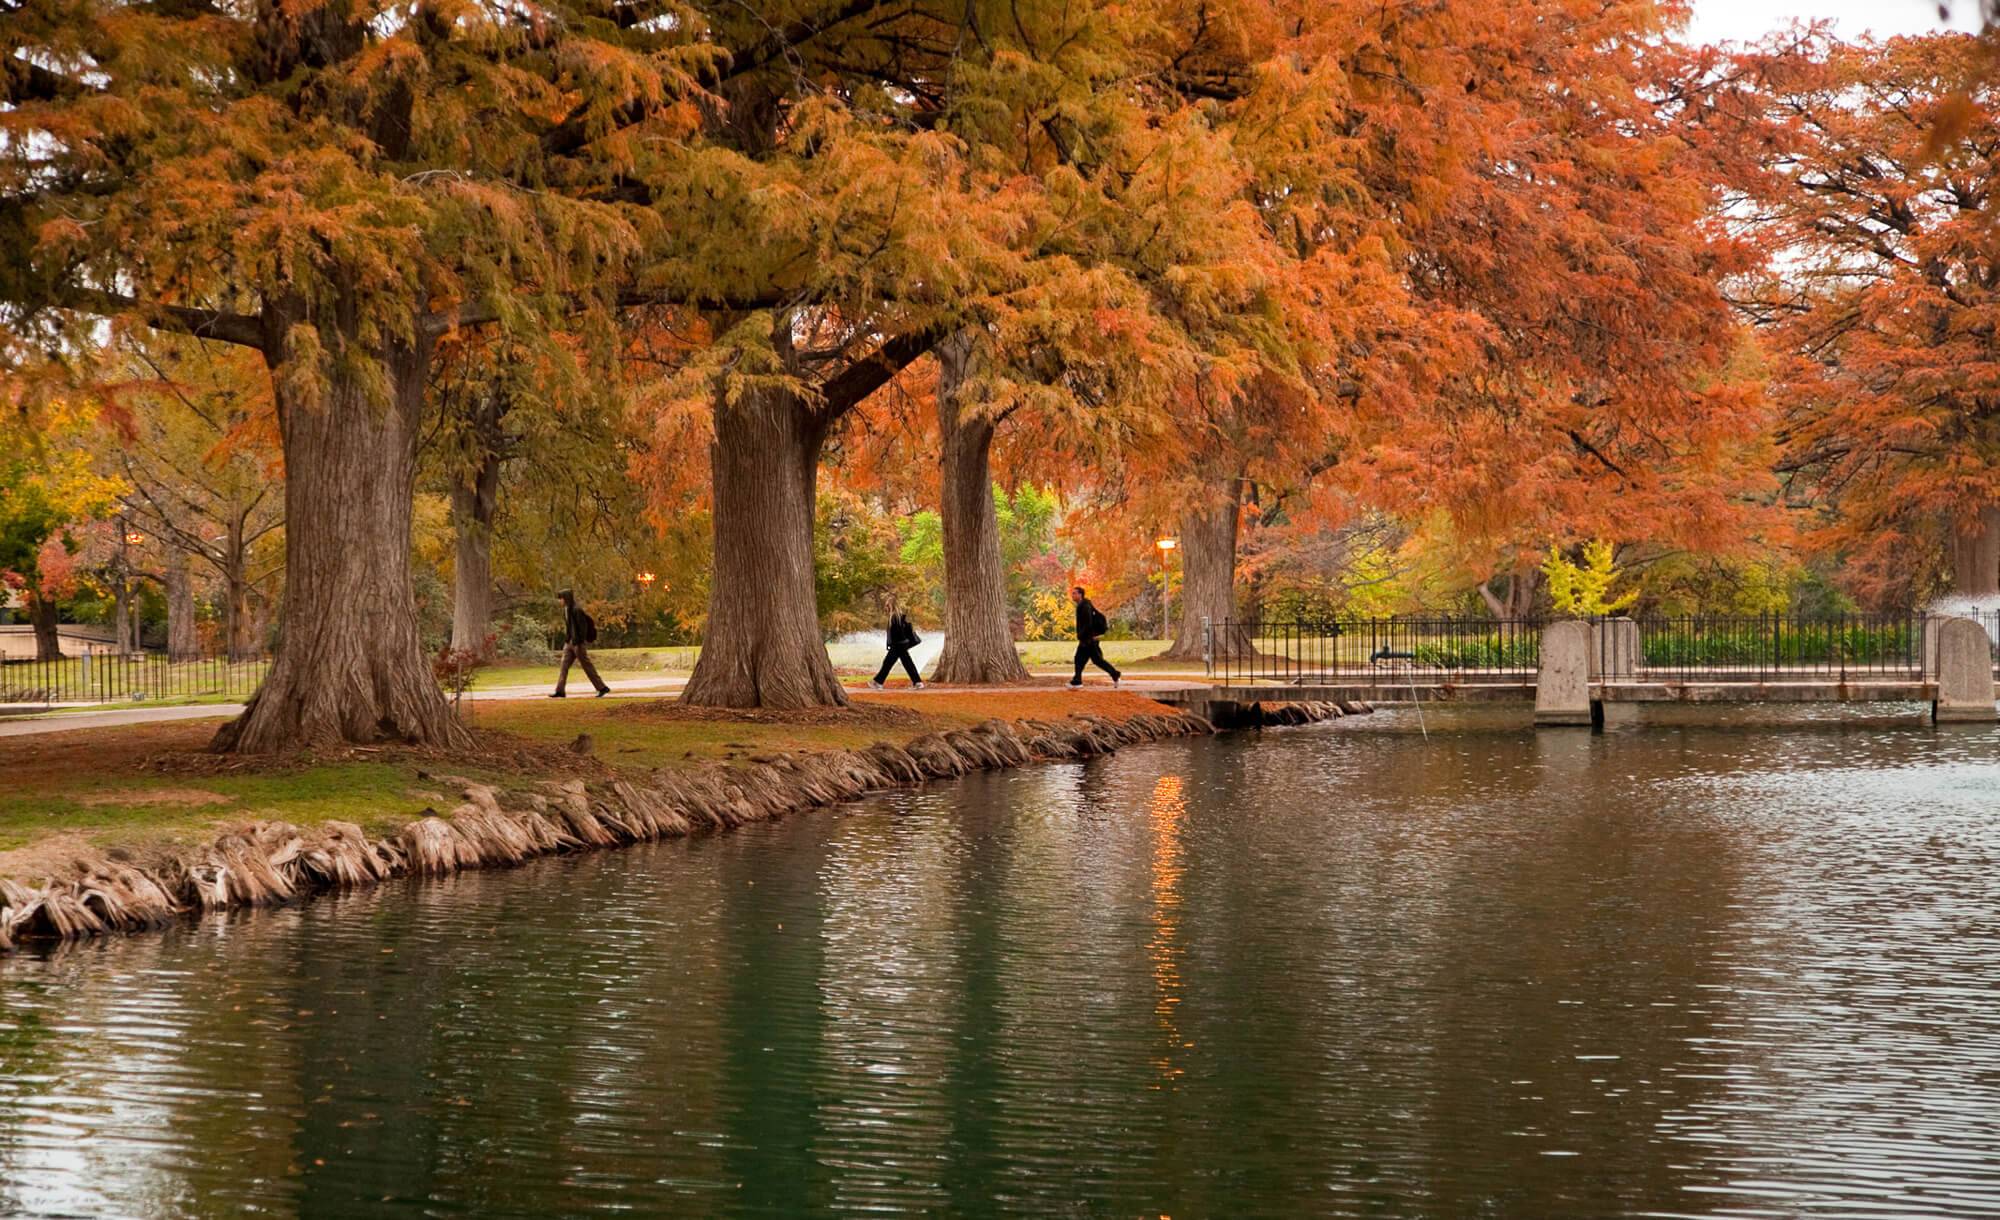 students walking by water with trees that have orange and red autumn leaves